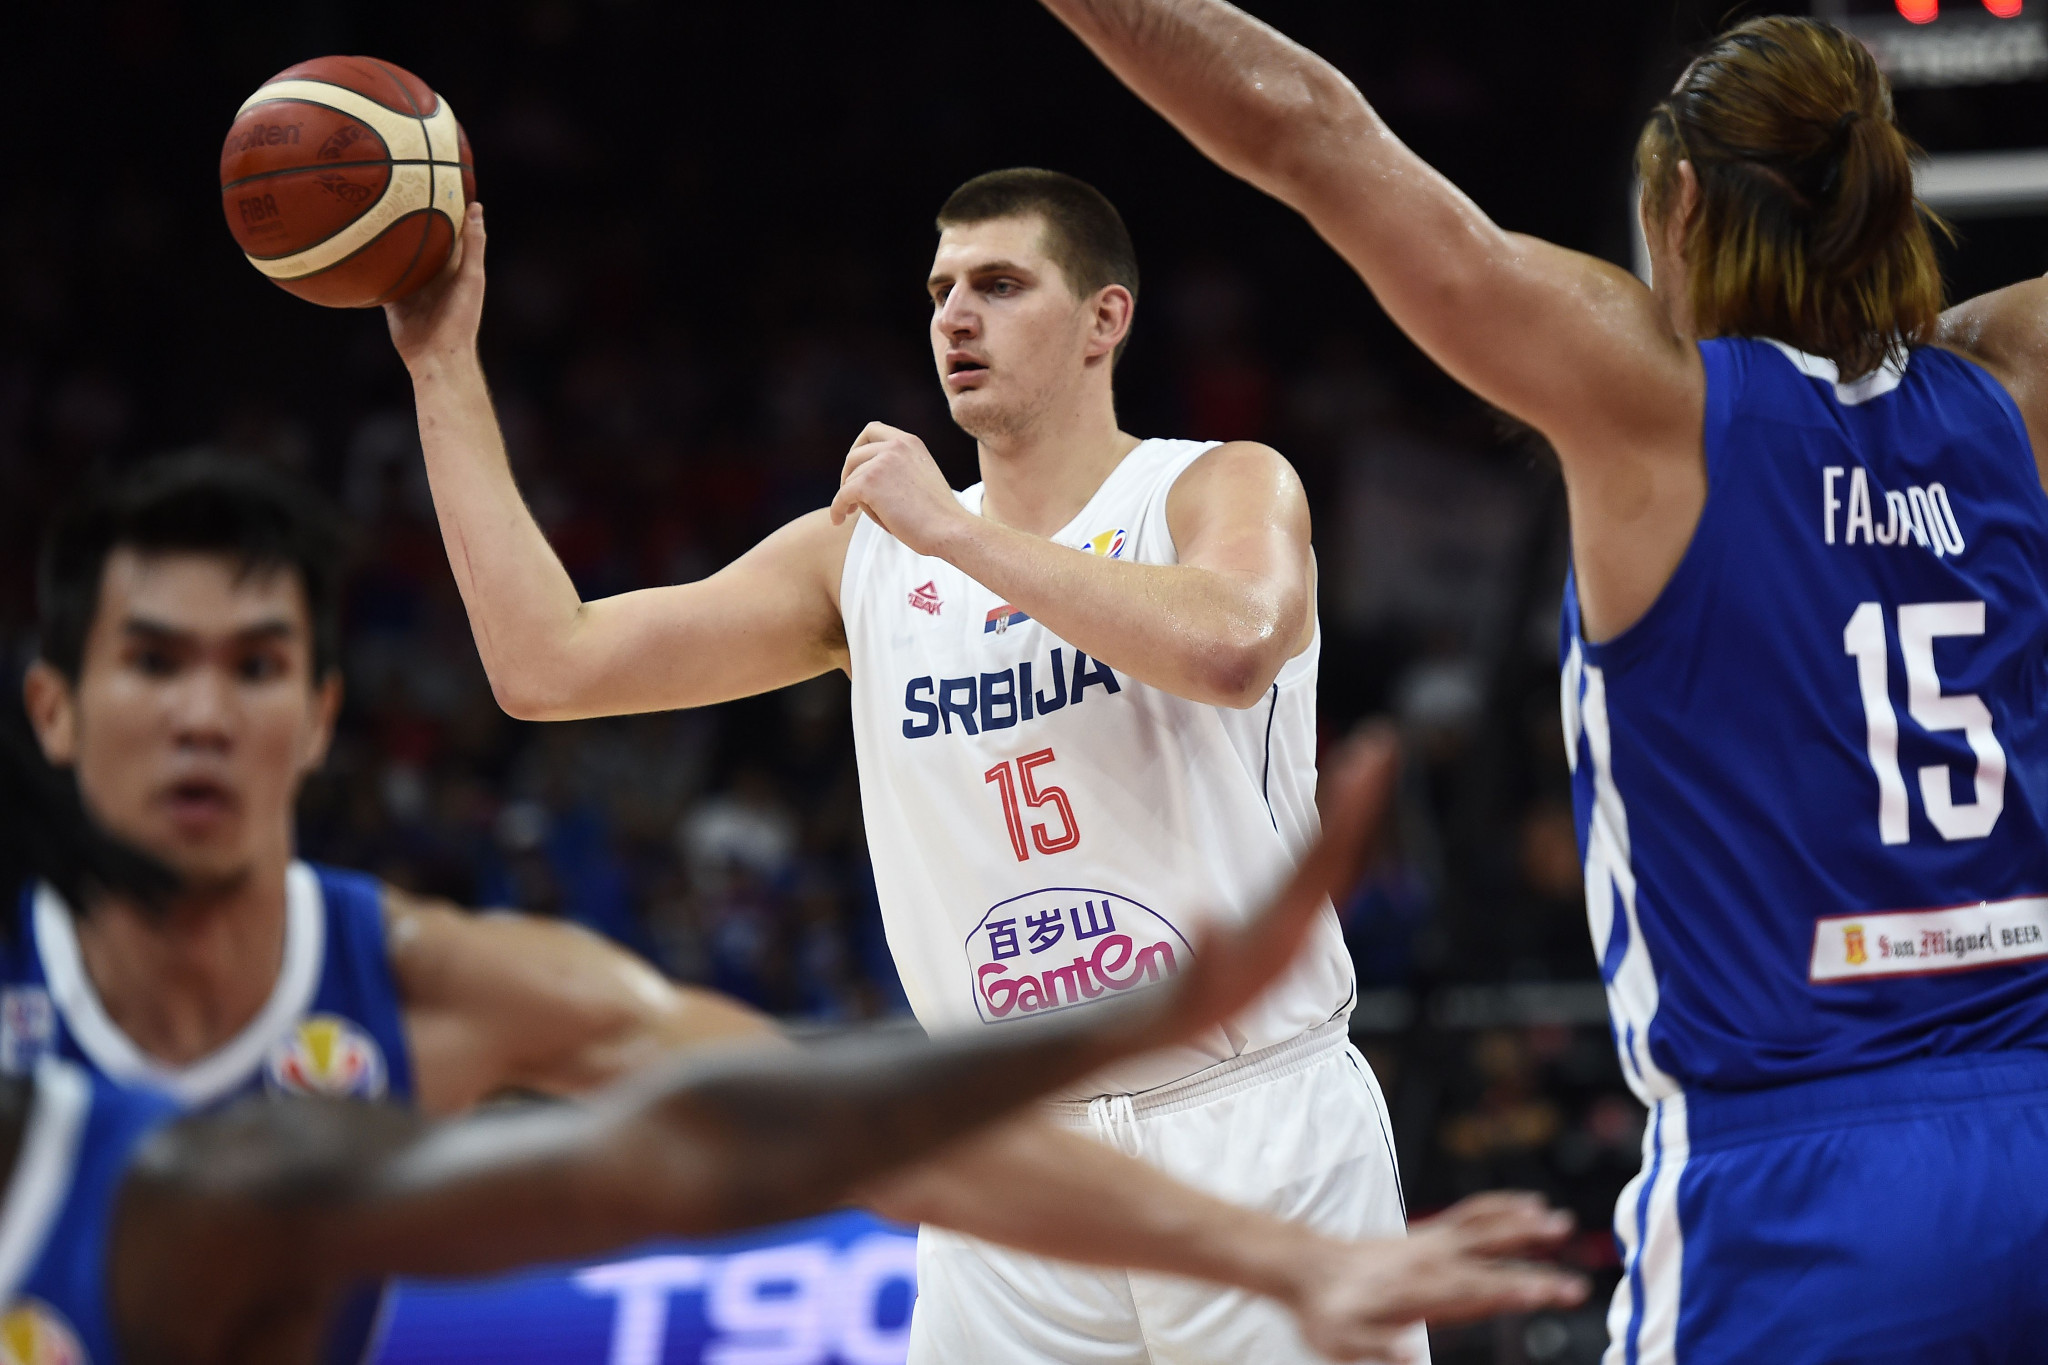 Six countries reach second phase on day three of FIBA World Cup